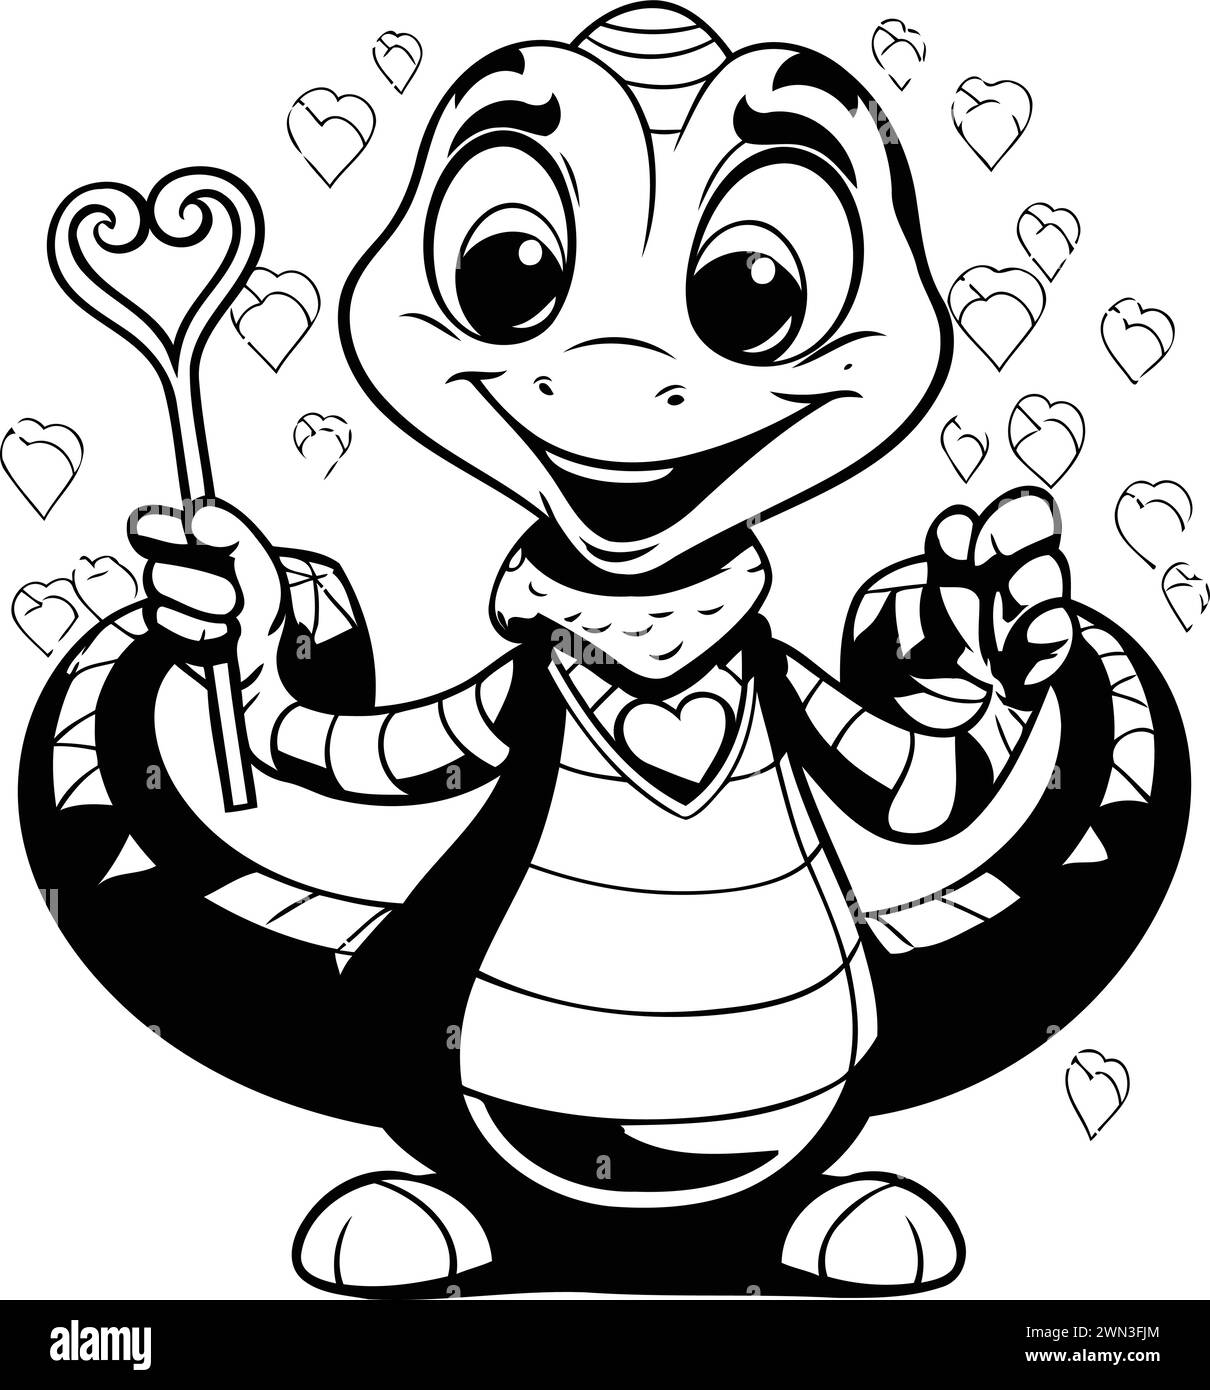 Black and white graphic illustration of a snake holding a magic wand with hearts around him. Stock Vector